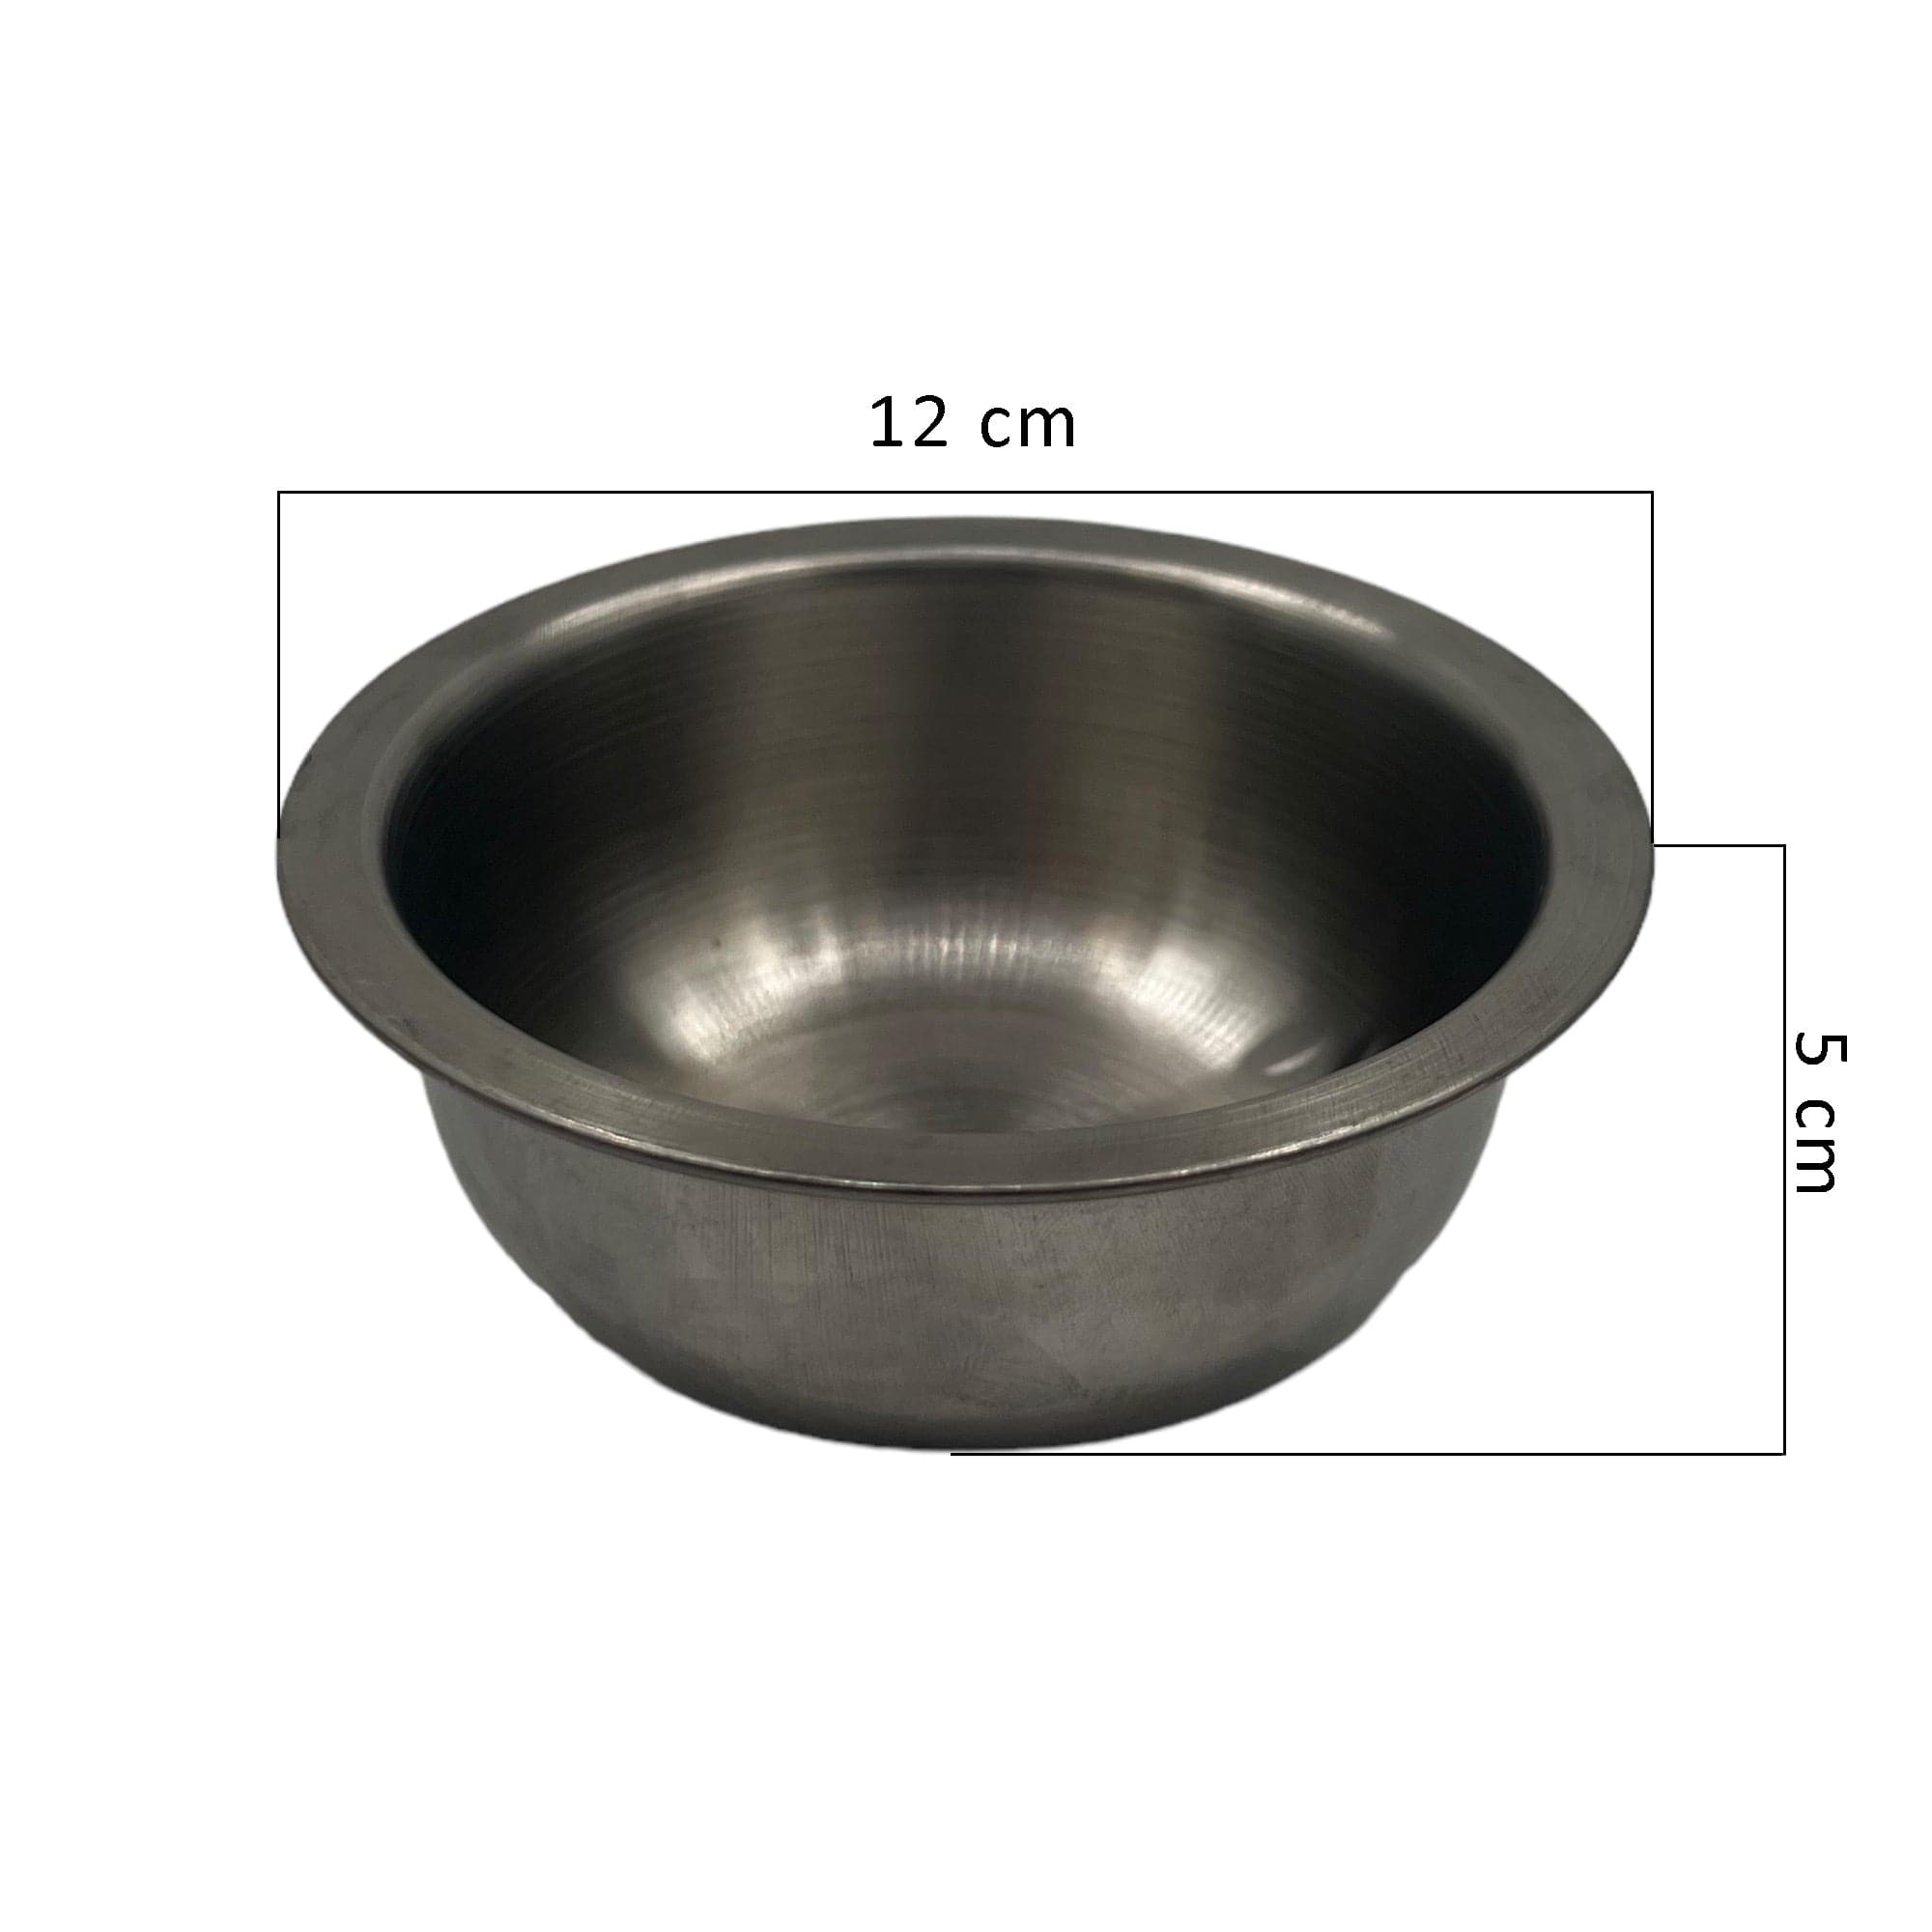 Eson - Stainless Steel Shaving Bowl With Lid 5x12cm